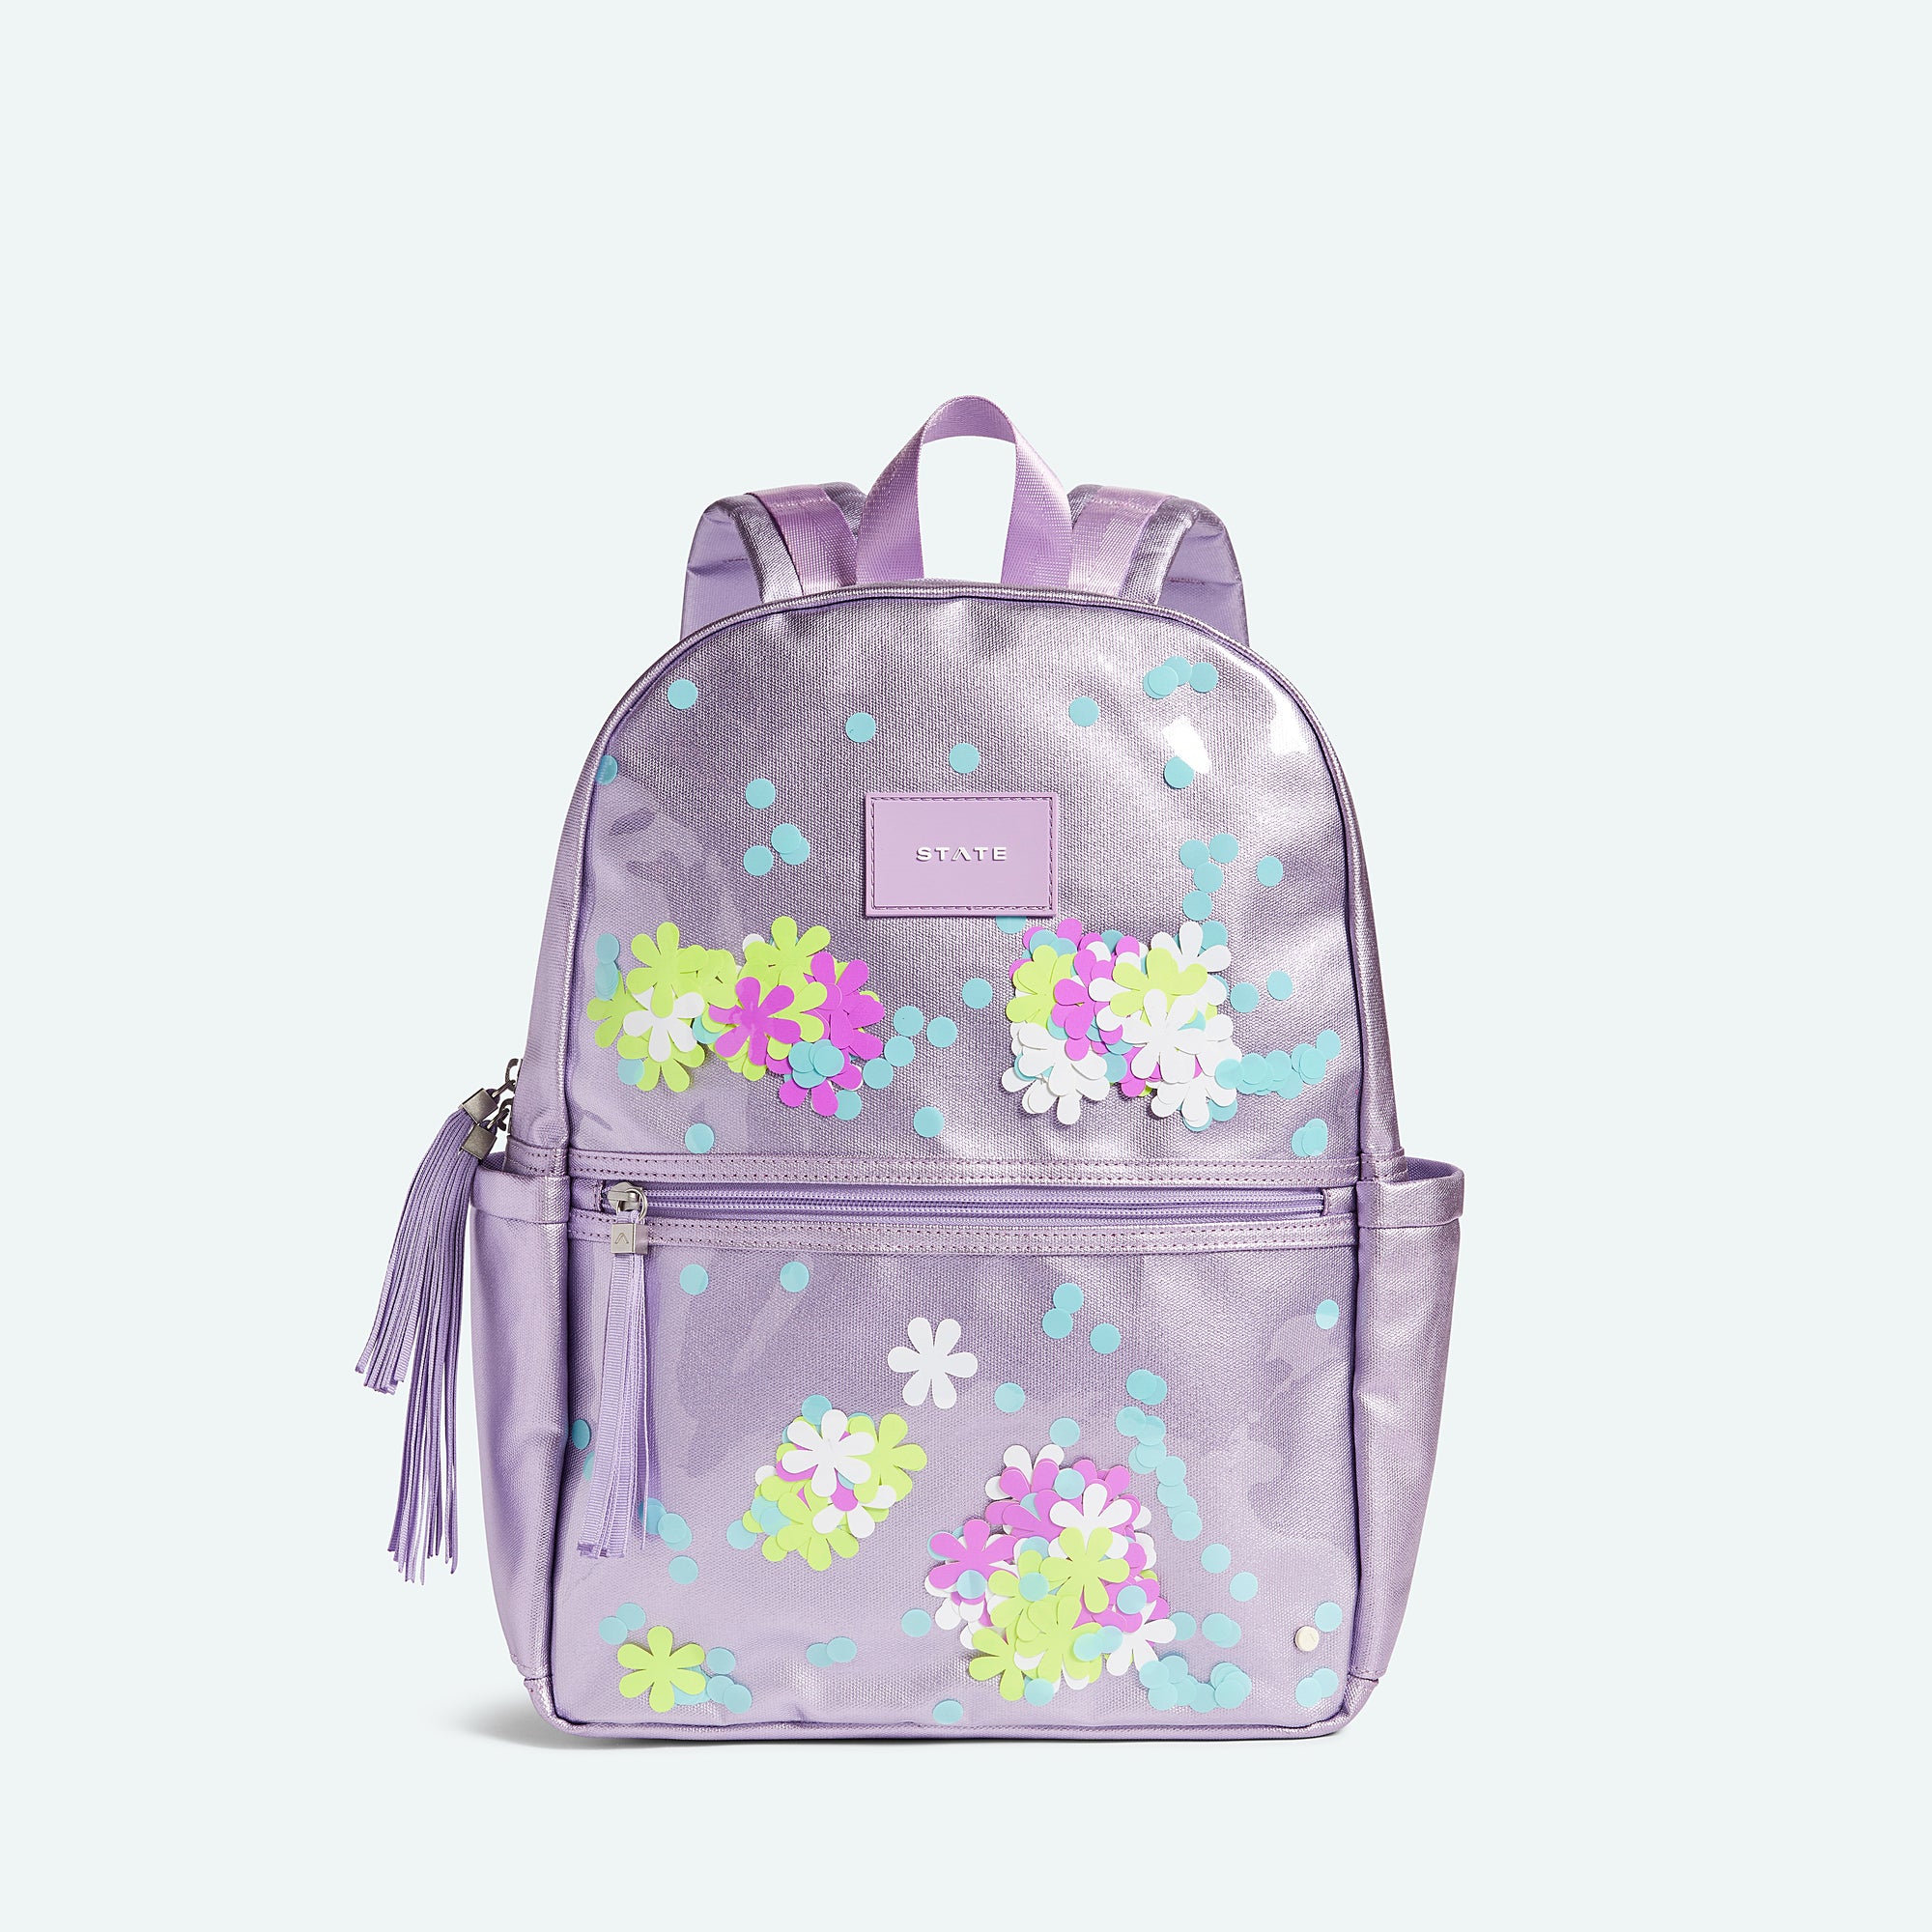 State Bags | Kane Kids Large Backpack Recycled Polyester Rainbow Gradient